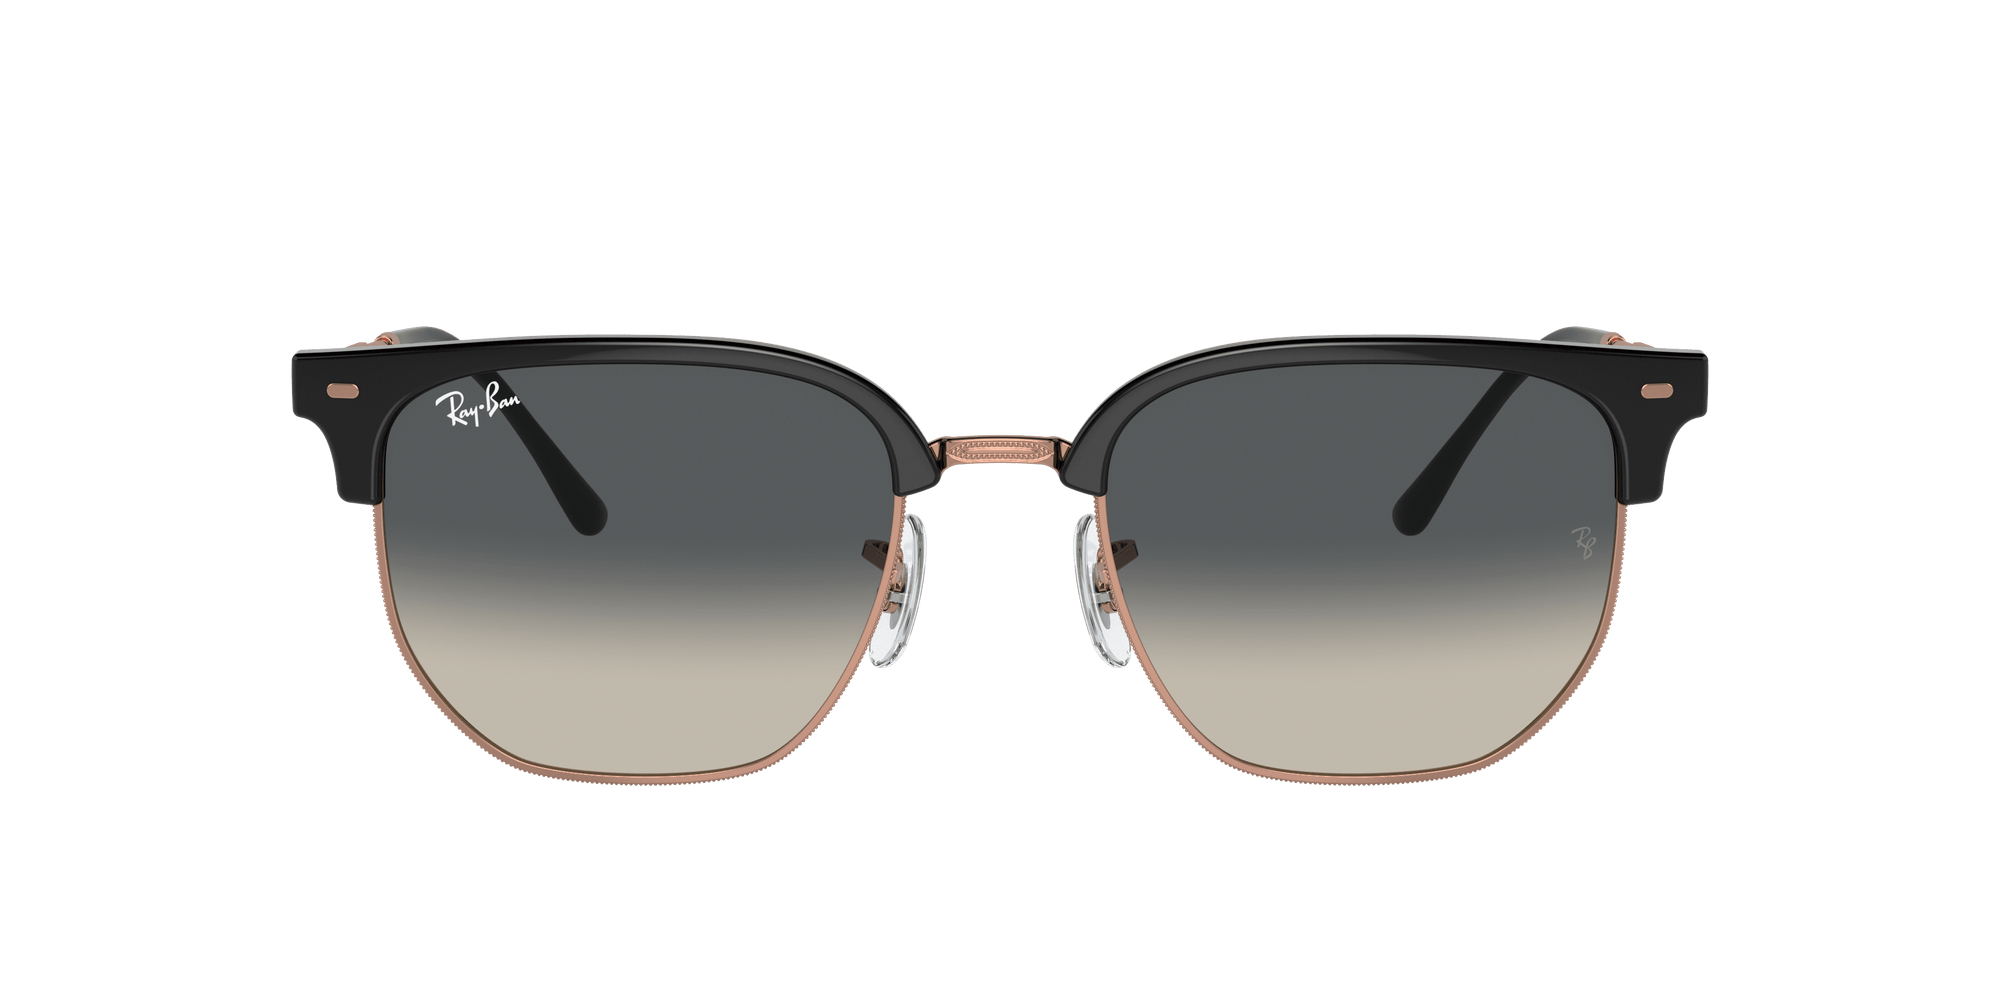 RAY-BAN New Clubmaster Polished Dark Grey On Rose Gold - Grey Sunglasses